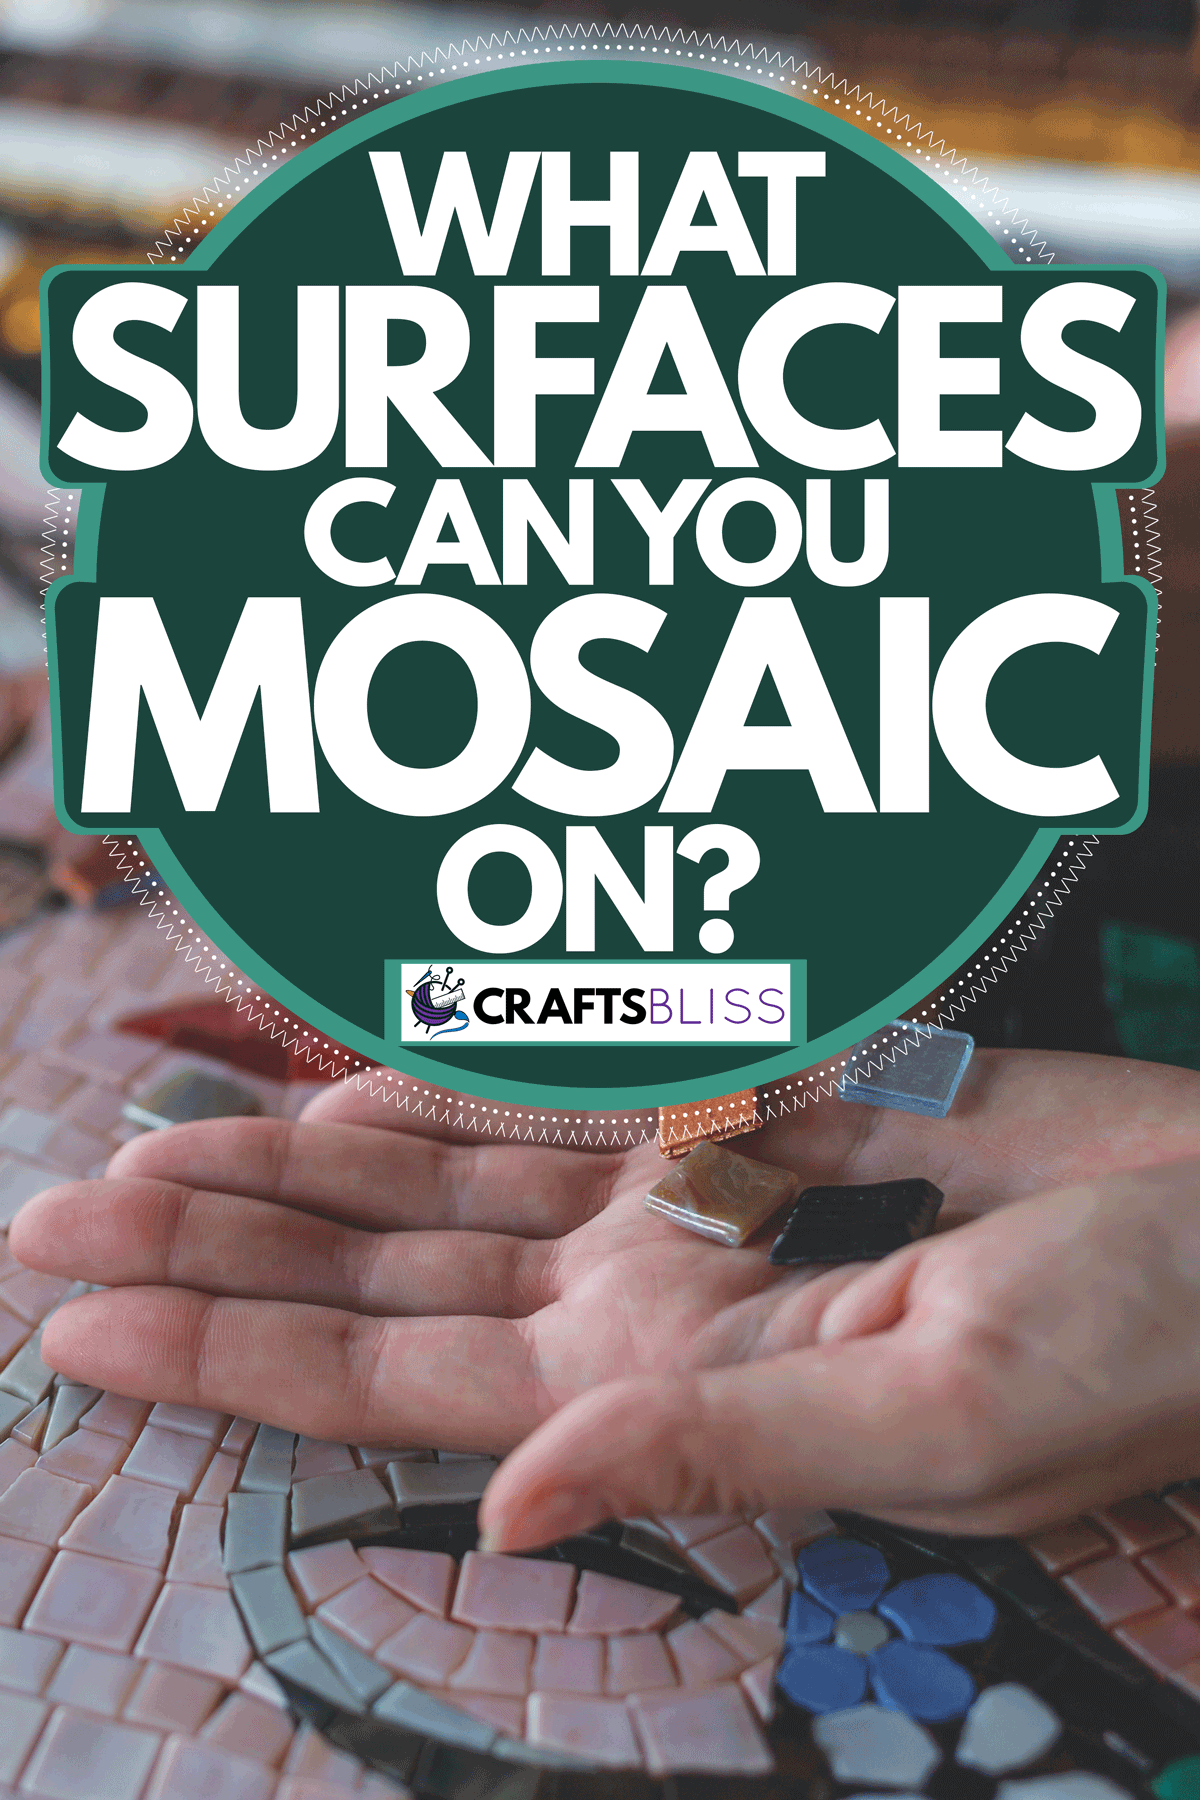 A woman making a mosaic art using small cut pieces, What Surfaces Can You Mosaic On?